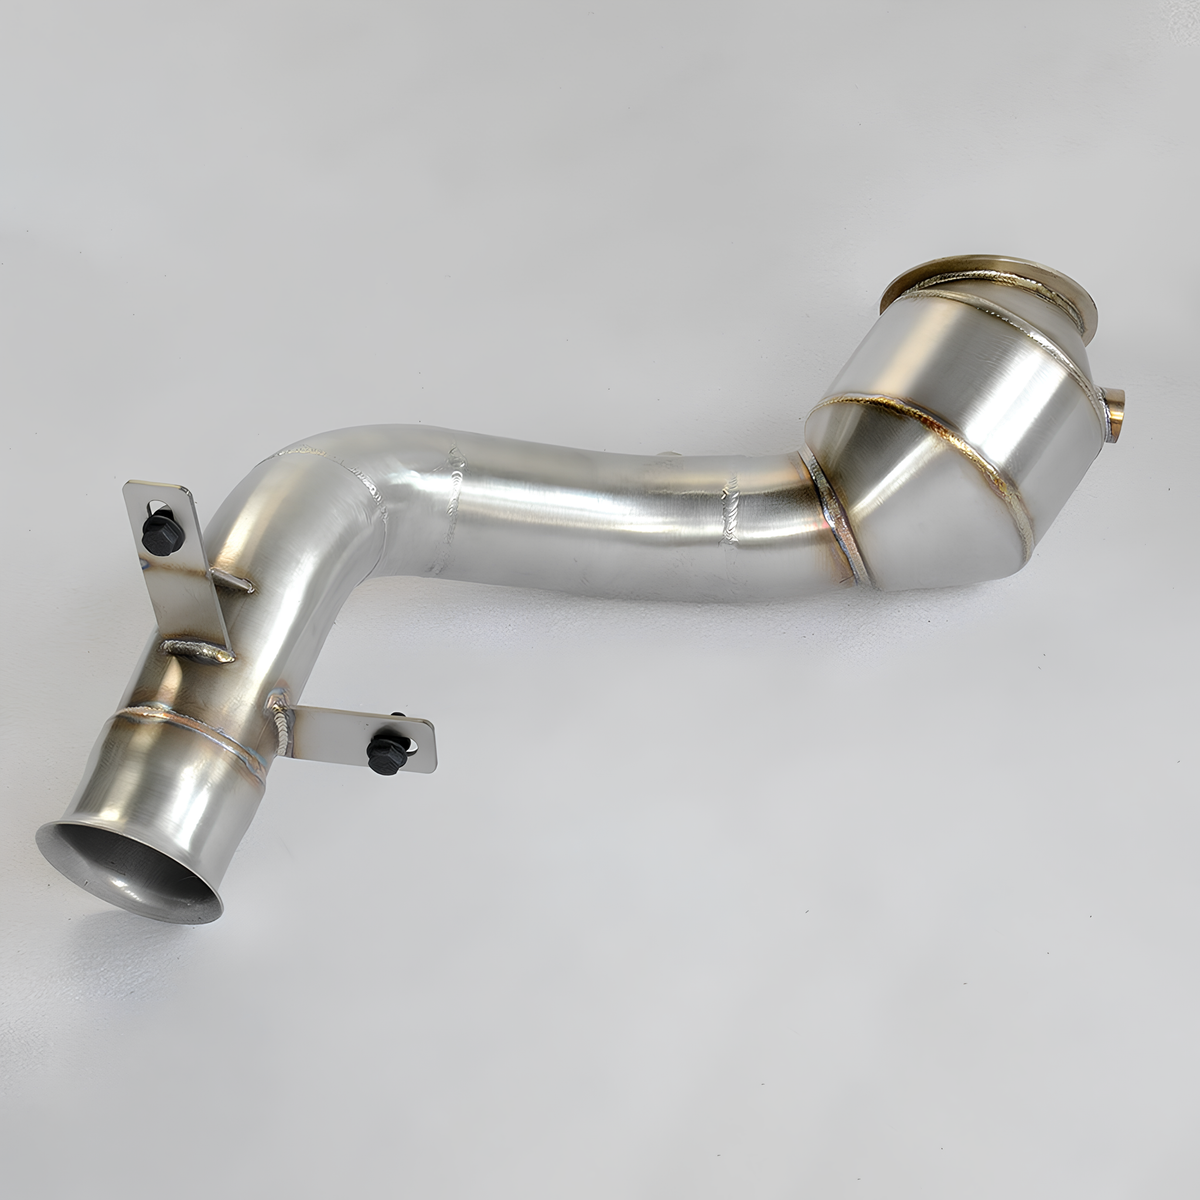 Rstype 304 stainless steel performance catalyst downpipe for Mercedes Benz C200 2018 1.5T race exhaust downpipe